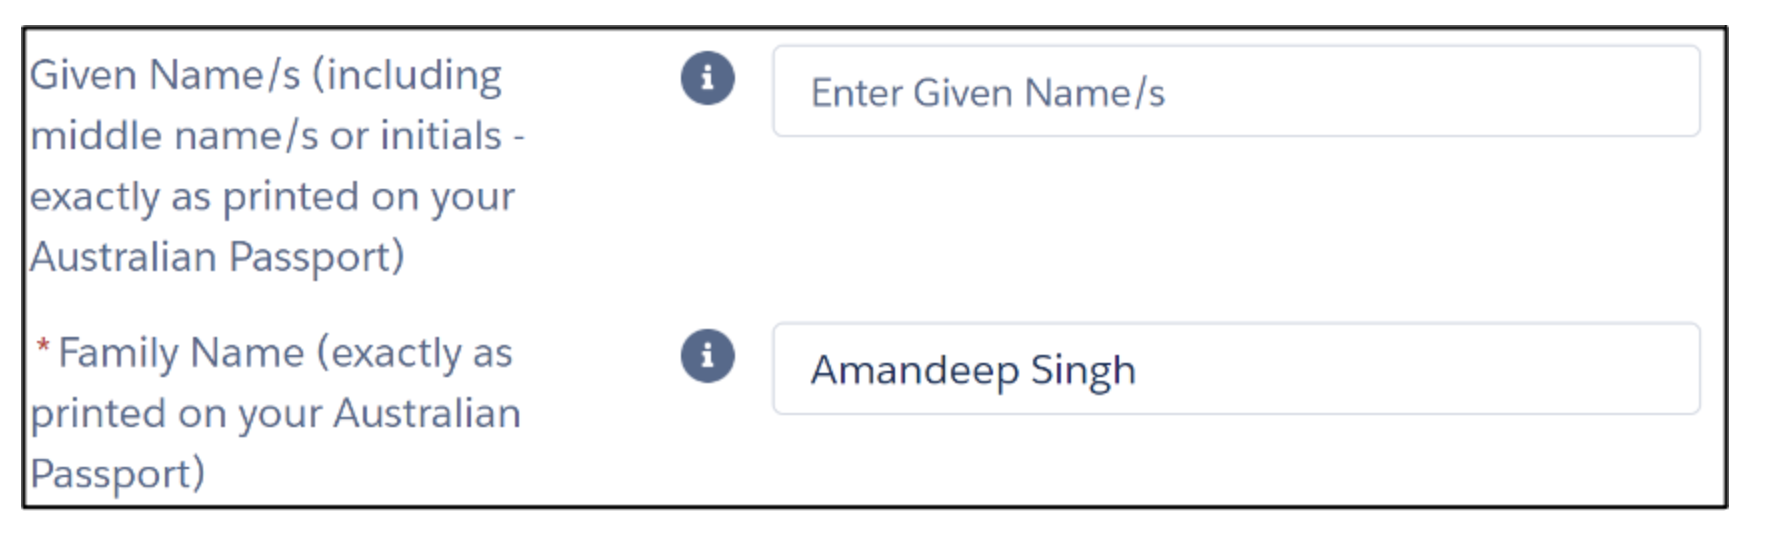 Leave the Given Name field blank. Enter your name as it is printed on the document in the Family Name field.